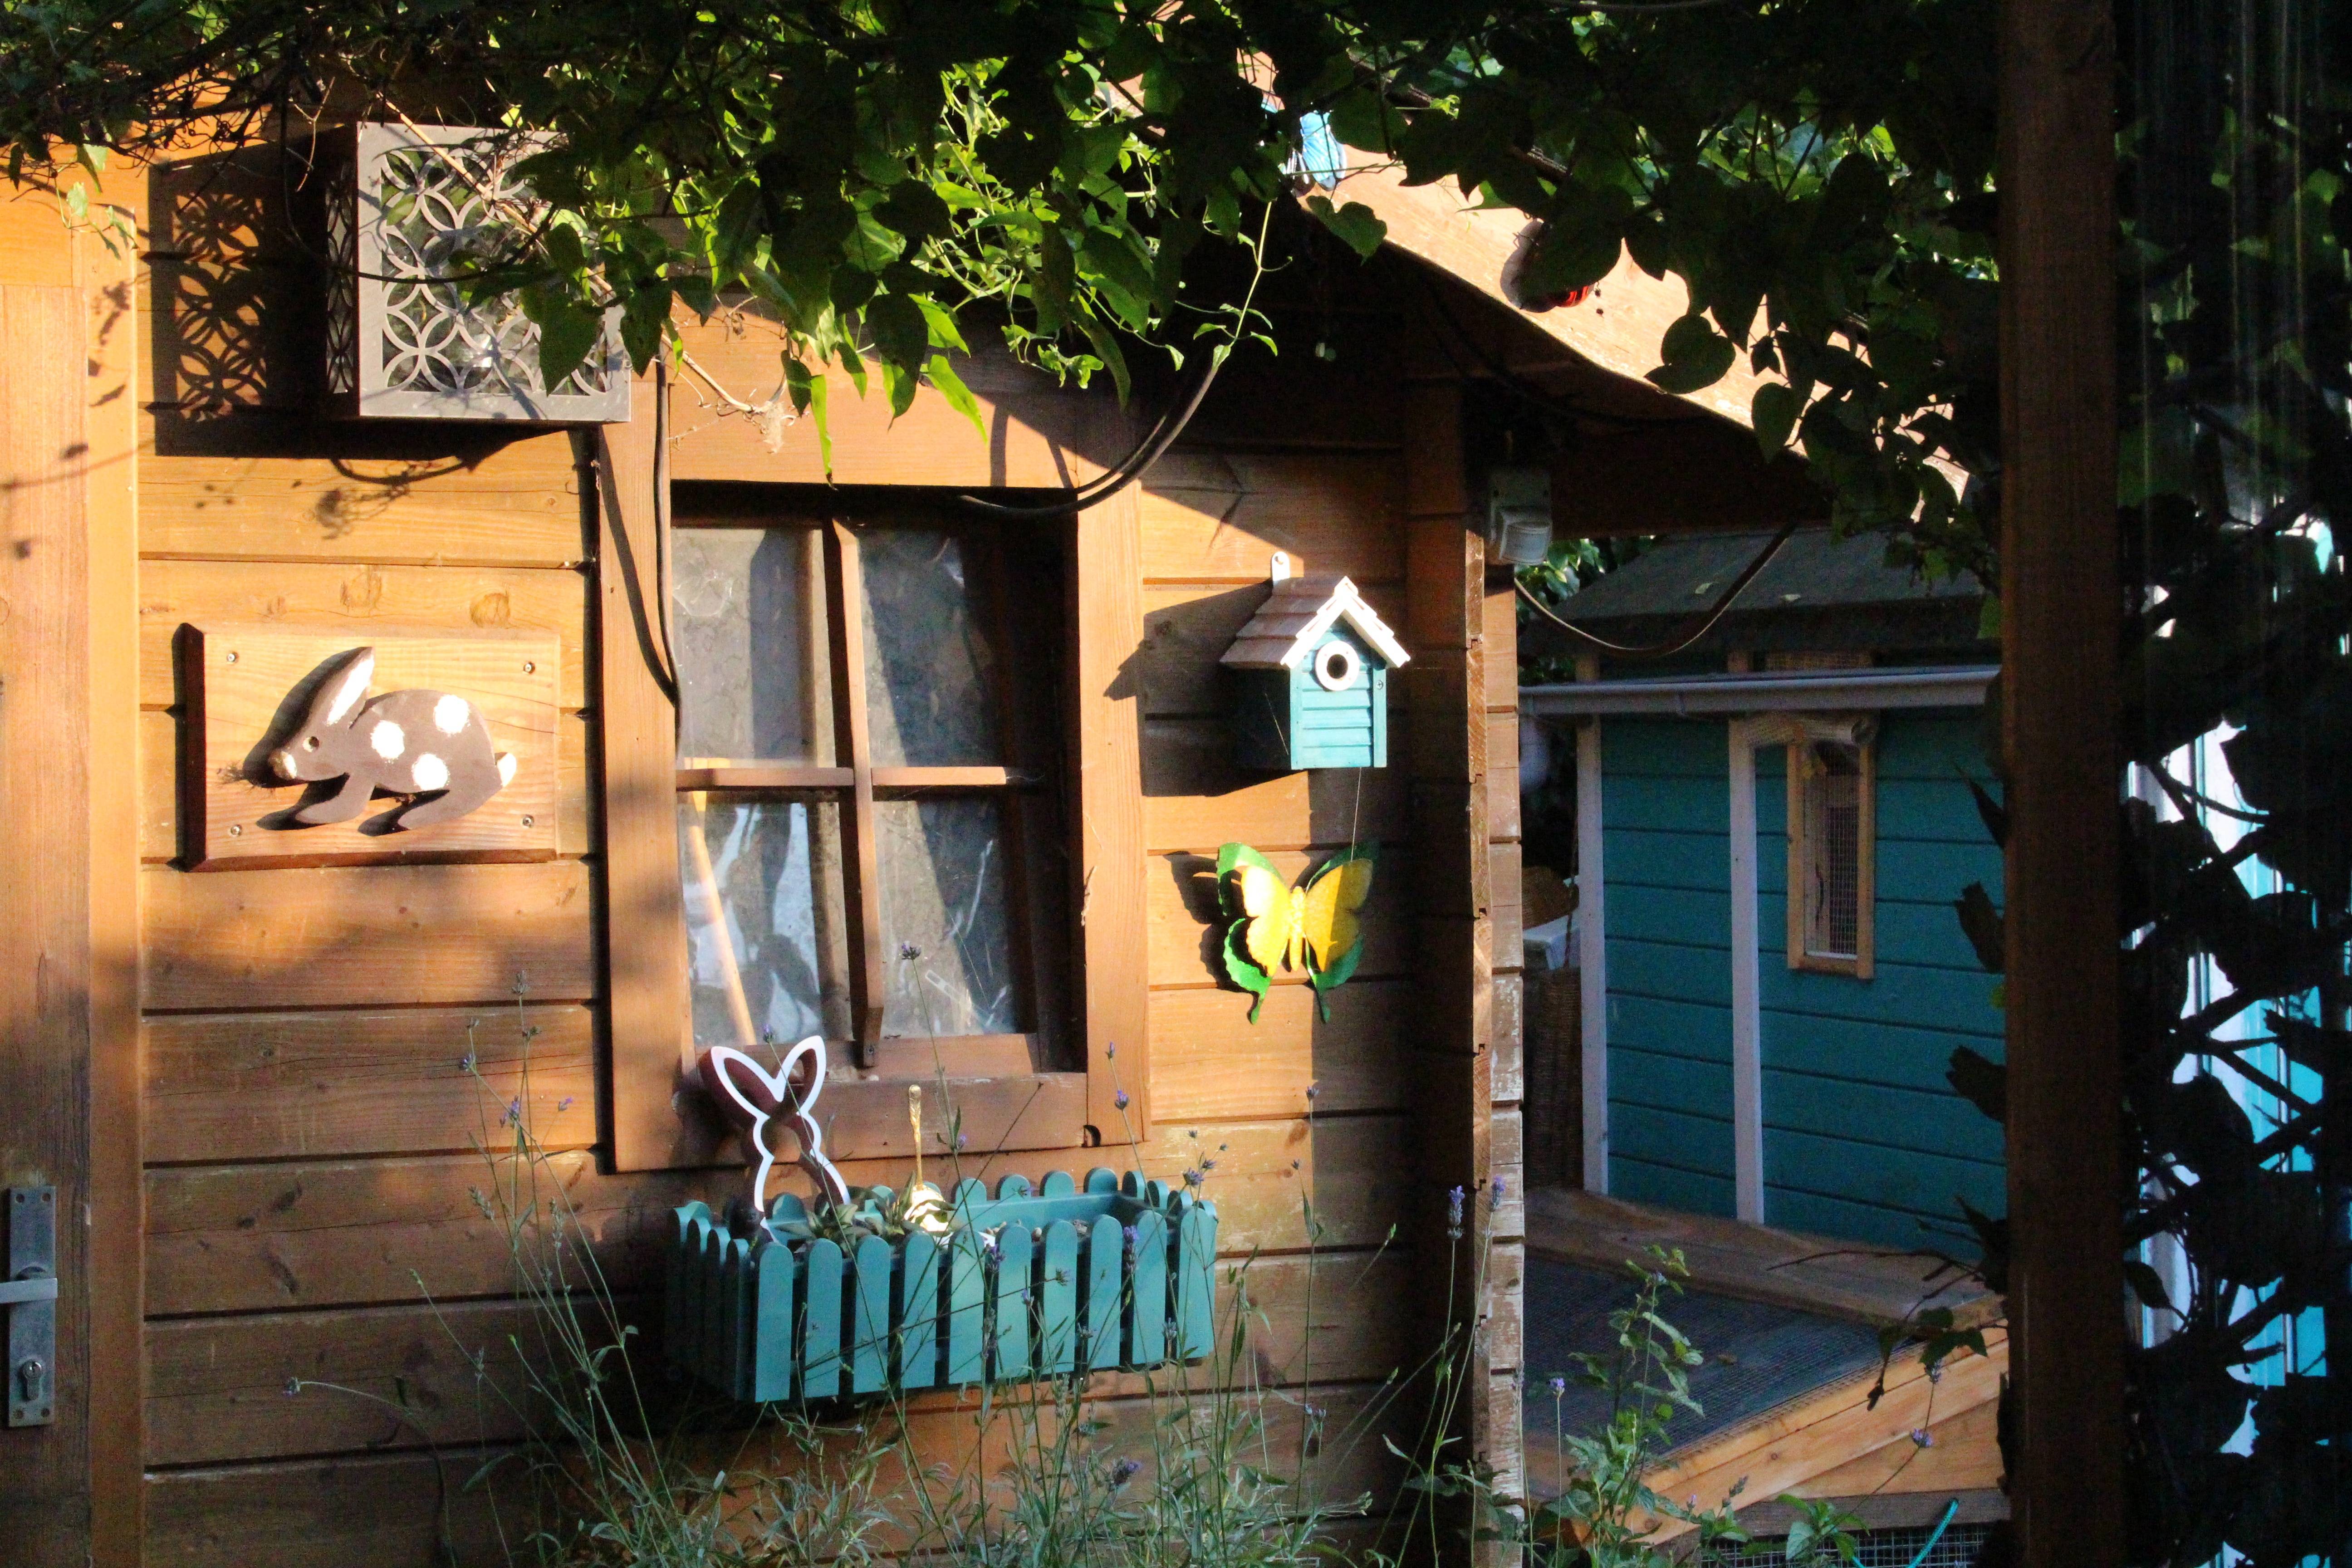 A photo of a garden shed.